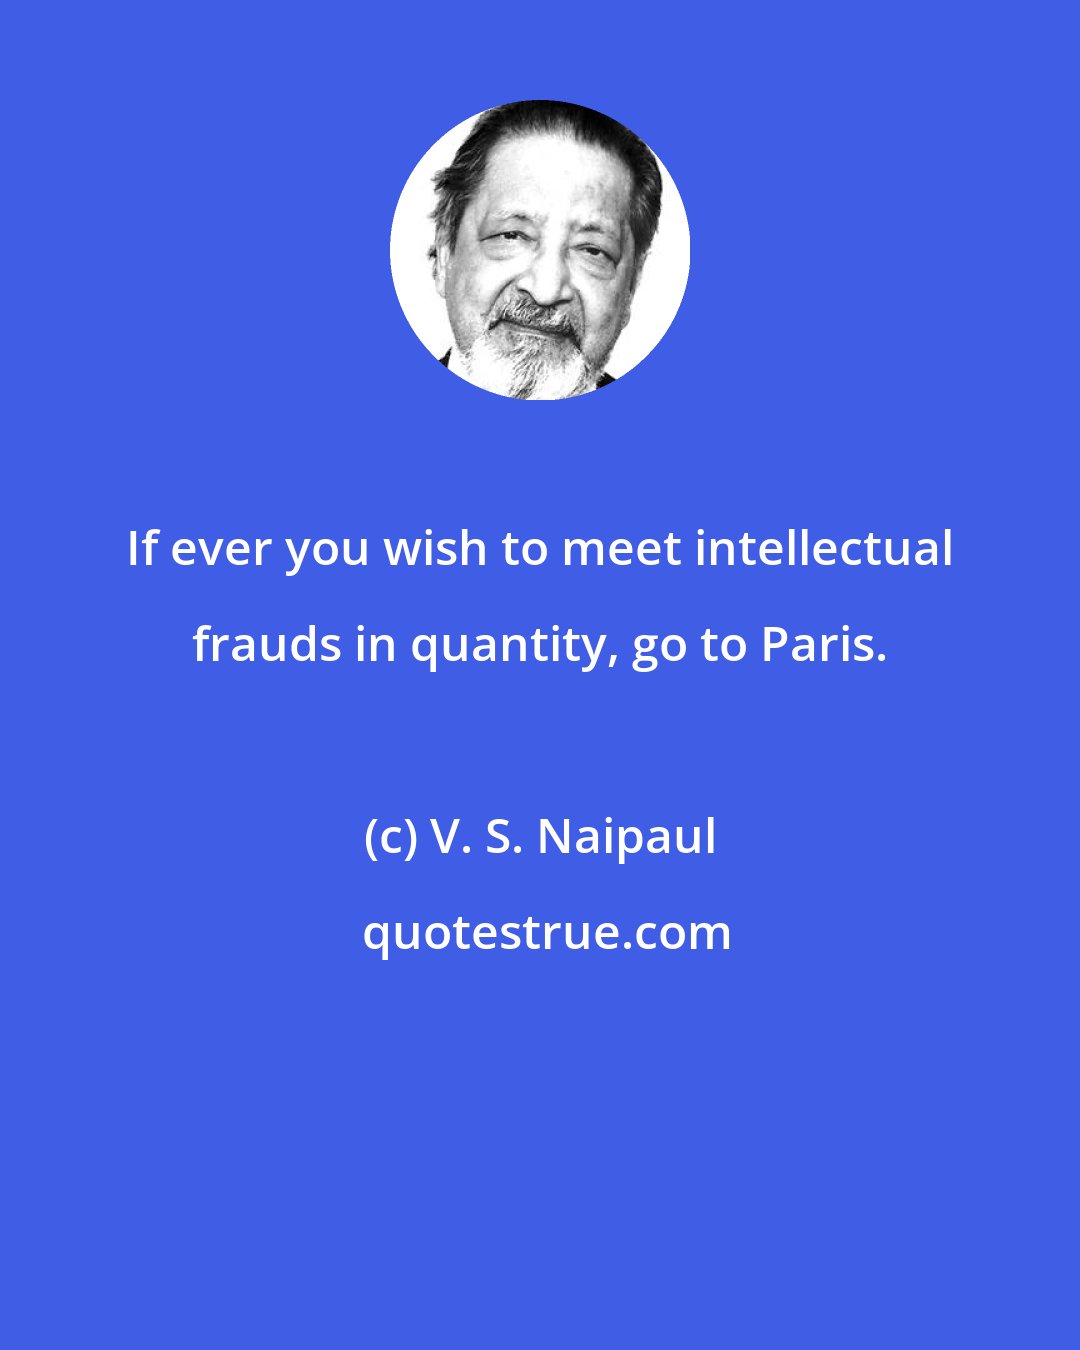 V. S. Naipaul: If ever you wish to meet intellectual frauds in quantity, go to Paris.